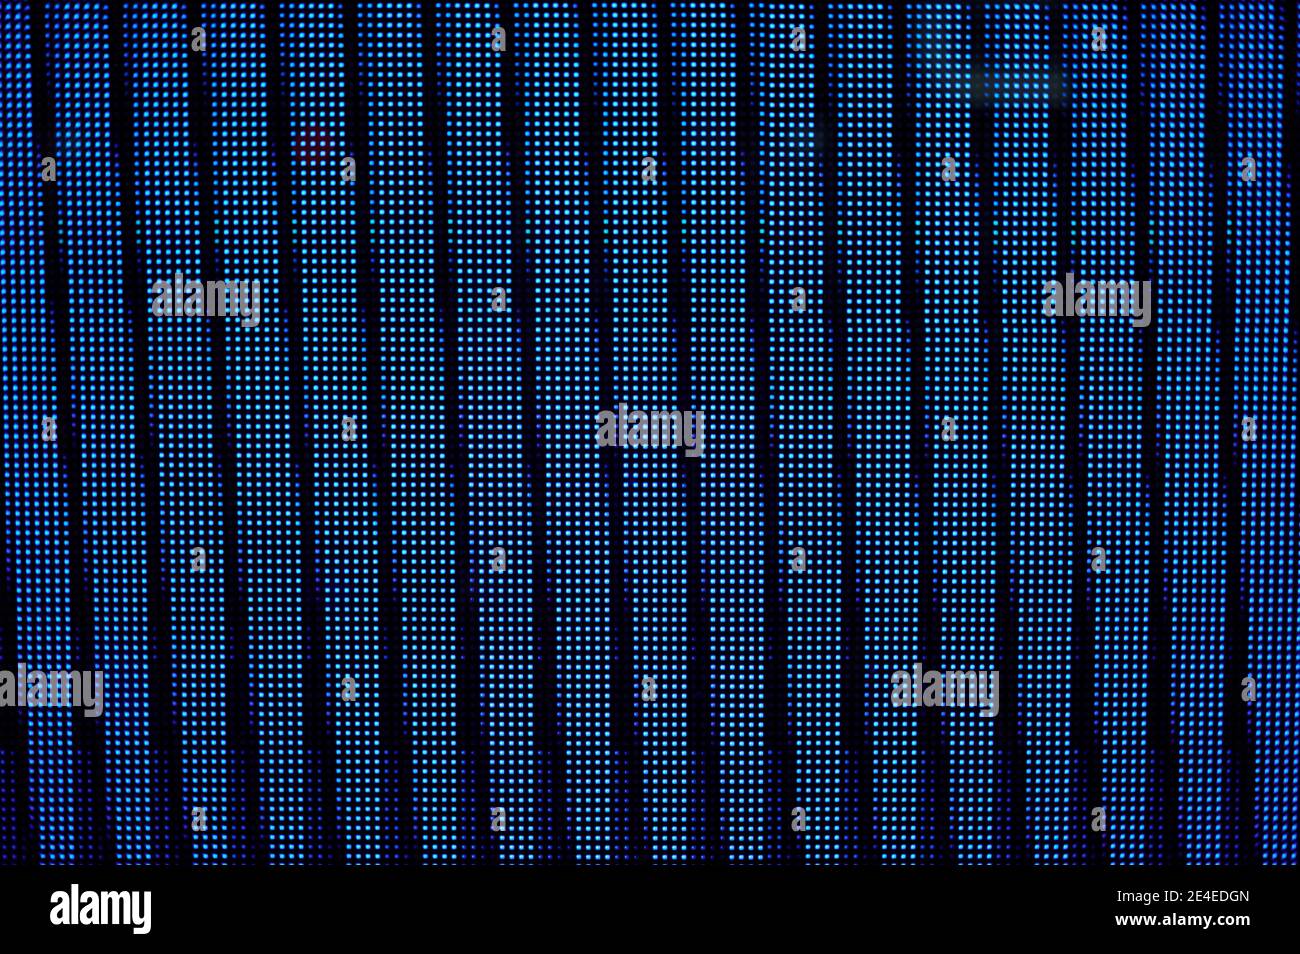 detail of a blue and white led advertising screen Stock Photo